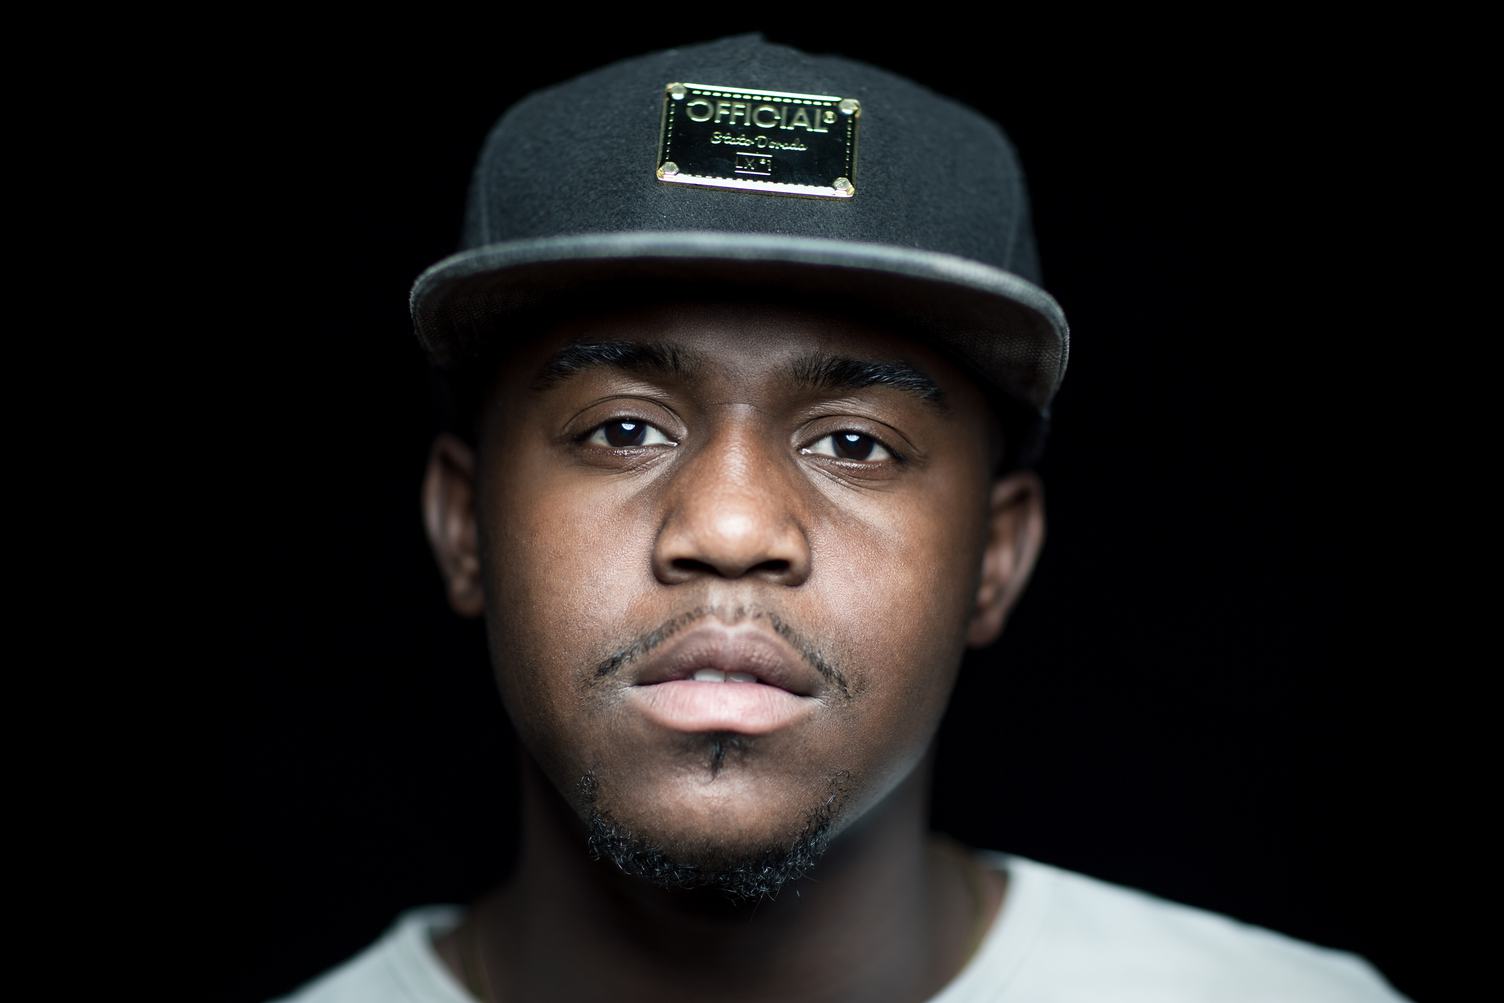 Portrait of Young Man with Cap On Black Background